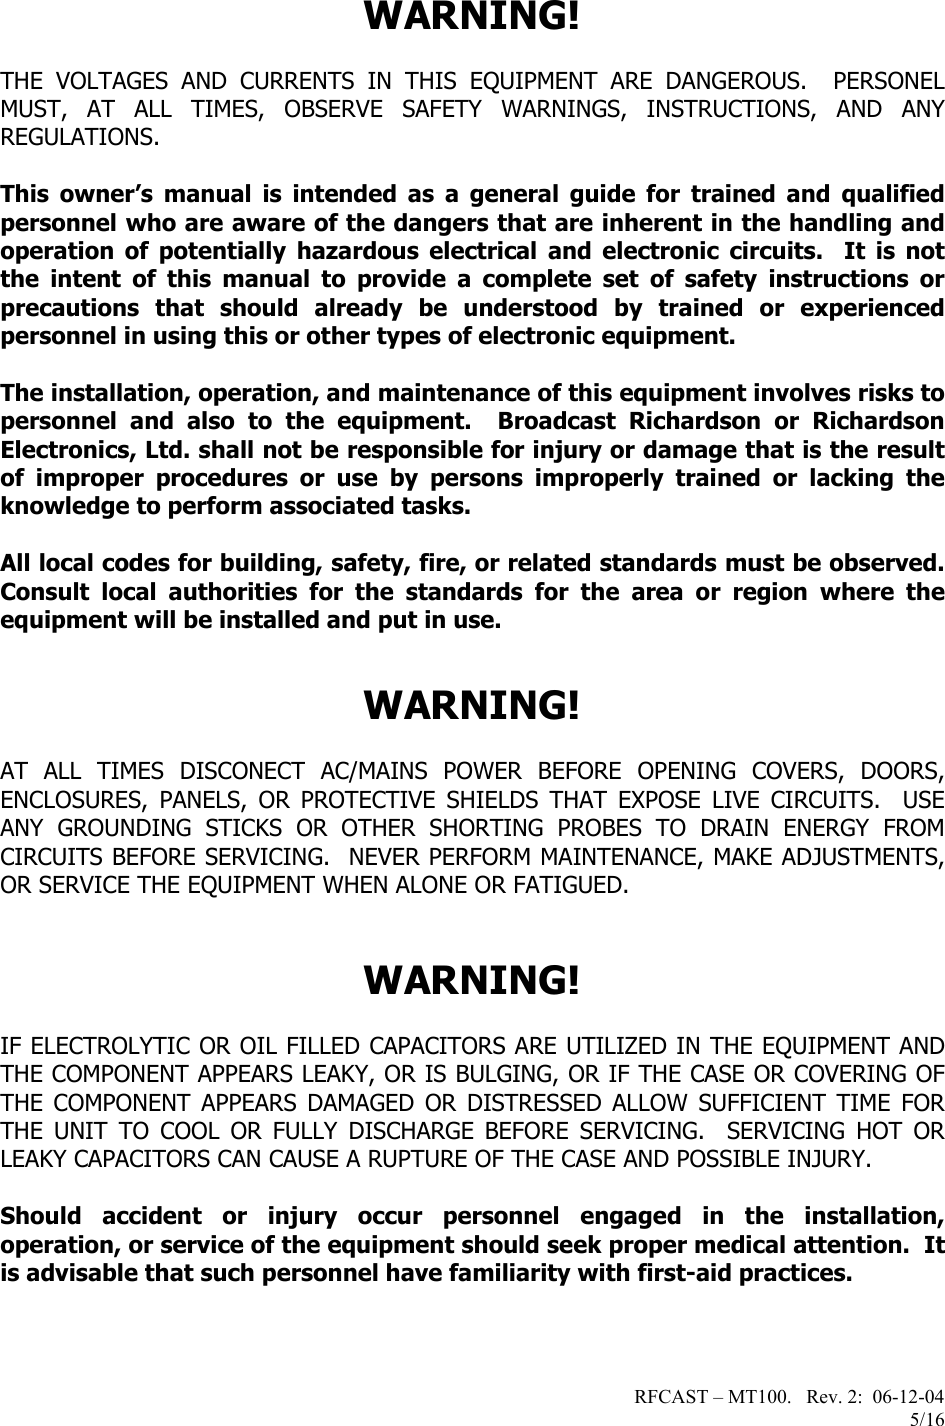 RFCAST – MT100.   Rev. 2:  06-12-04                       5/16 WARNING!  THE VOLTAGES AND CURRENTS IN THIS EQUIPMENT ARE DANGEROUS.  PERSONEL MUST, AT ALL TIMES, OBSERVE SAFETY WARNINGS, INSTRUCTIONS, AND ANY REGULATIONS.  This owner’s manual is intended as a general guide for trained and qualified personnel who are aware of the dangers that are inherent in the handling and operation of potentially hazardous electrical and electronic circuits.  It is not the intent of this manual to provide a complete set of safety instructions or precautions that should already be understood by trained or experienced personnel in using this or other types of electronic equipment.   The installation, operation, and maintenance of this equipment involves risks to personnel and also to the equipment.  Broadcast Richardson or Richardson Electronics, Ltd. shall not be responsible for injury or damage that is the result of improper procedures or use by persons improperly trained or lacking the knowledge to perform associated tasks.  All local codes for building, safety, fire, or related standards must be observed.  Consult local authorities for the standards for the area or region where the equipment will be installed and put in use.    WARNING!  AT ALL TIMES DISCONECT AC/MAINS POWER BEFORE OPENING COVERS, DOORS, ENCLOSURES, PANELS, OR PROTECTIVE SHIELDS THAT EXPOSE LIVE CIRCUITS.  USE ANY GROUNDING STICKS OR OTHER SHORTING PROBES TO DRAIN ENERGY FROM CIRCUITS BEFORE SERVICING.  NEVER PERFORM MAINTENANCE, MAKE ADJUSTMENTS, OR SERVICE THE EQUIPMENT WHEN ALONE OR FATIGUED.   WARNING!  IF ELECTROLYTIC OR OIL FILLED CAPACITORS ARE UTILIZED IN THE EQUIPMENT AND THE COMPONENT APPEARS LEAKY, OR IS BULGING, OR IF THE CASE OR COVERING OF THE COMPONENT APPEARS DAMAGED OR DISTRESSED ALLOW SUFFICIENT TIME FOR THE UNIT TO COOL OR FULLY DISCHARGE BEFORE SERVICING.  SERVICING HOT OR LEAKY CAPACITORS CAN CAUSE A RUPTURE OF THE CASE AND POSSIBLE INJURY.  Should accident or injury occur personnel engaged in the installation, operation, or service of the equipment should seek proper medical attention.  It is advisable that such personnel have familiarity with first-aid practices.       